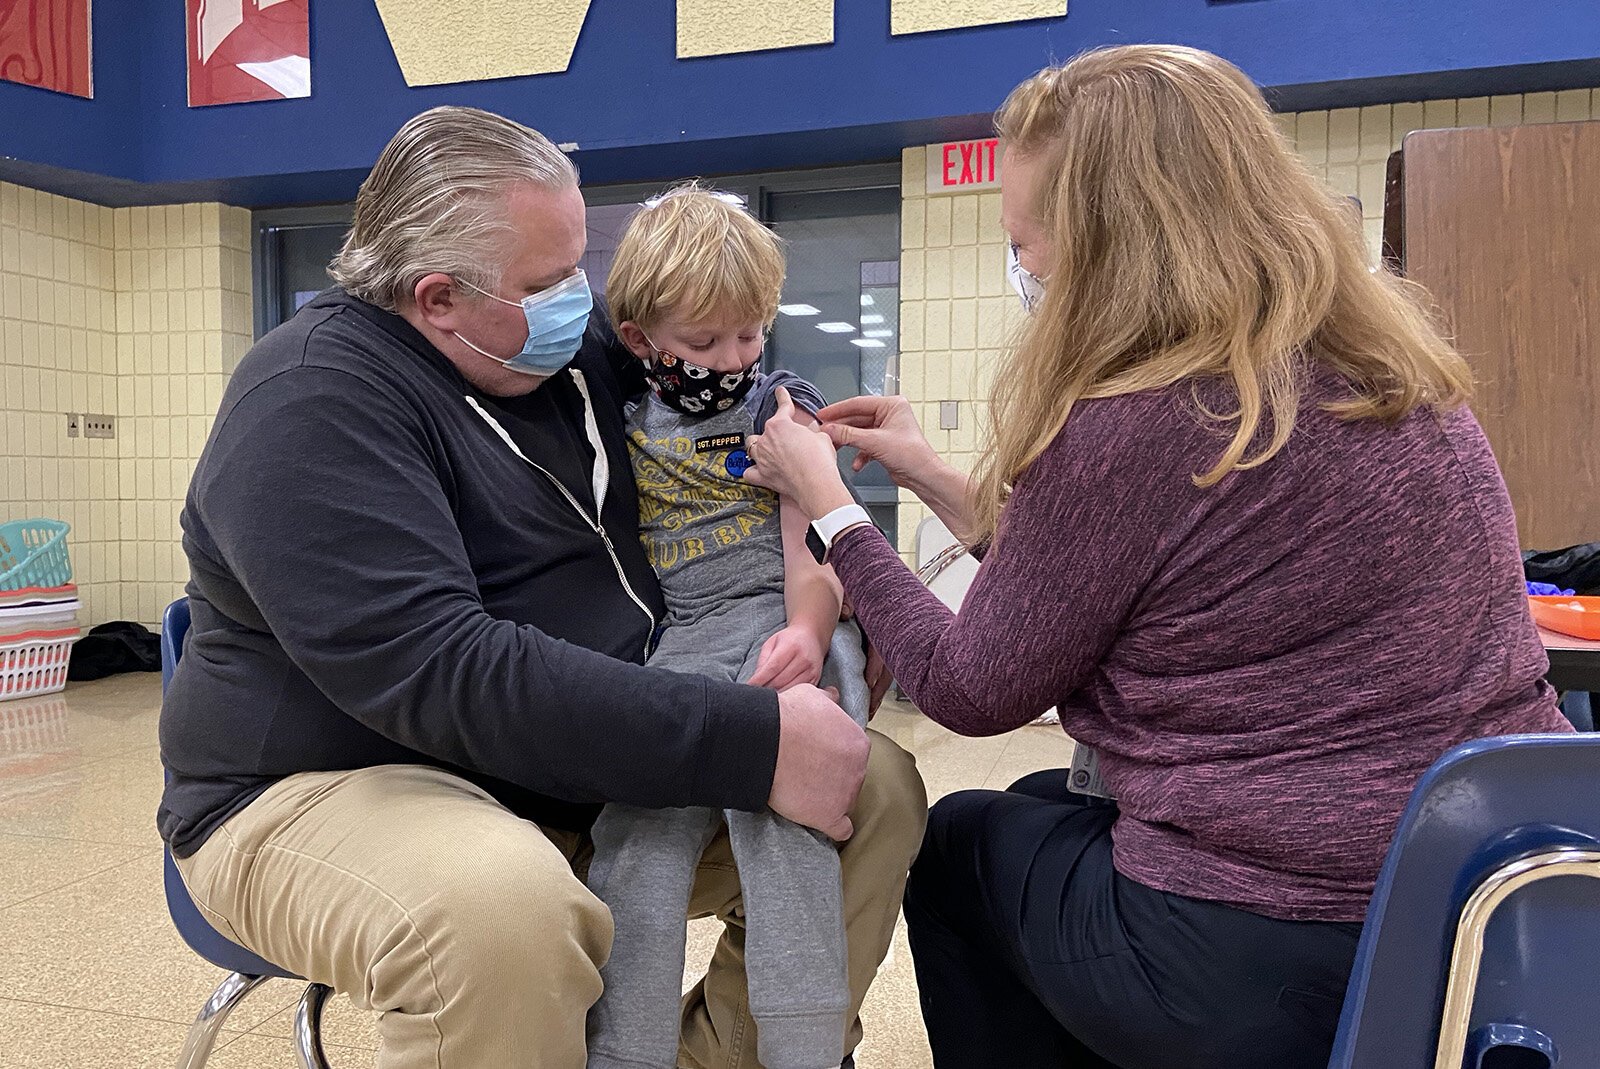 A children's vaccination event at the Ottawa County Department of Public Health.